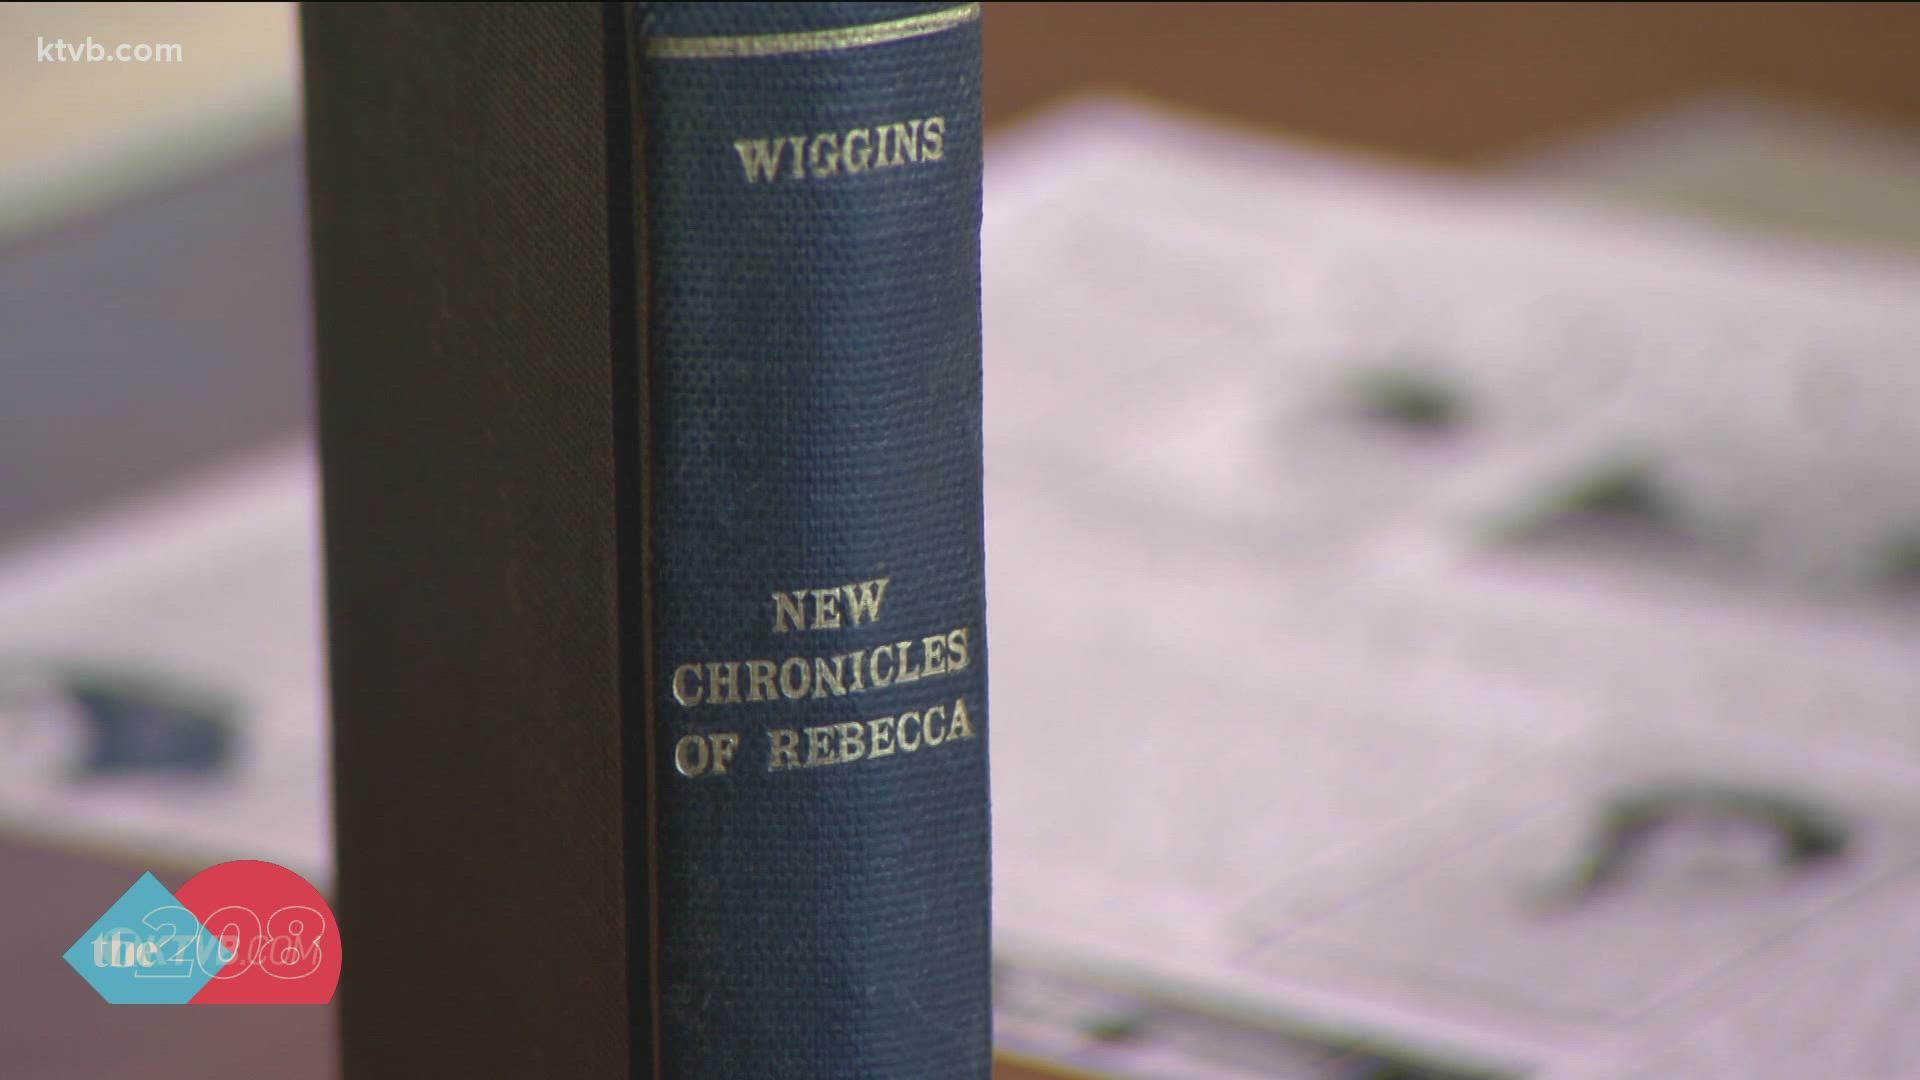 A book that was last checked out in 1911, was returned to the Boise Library last week.